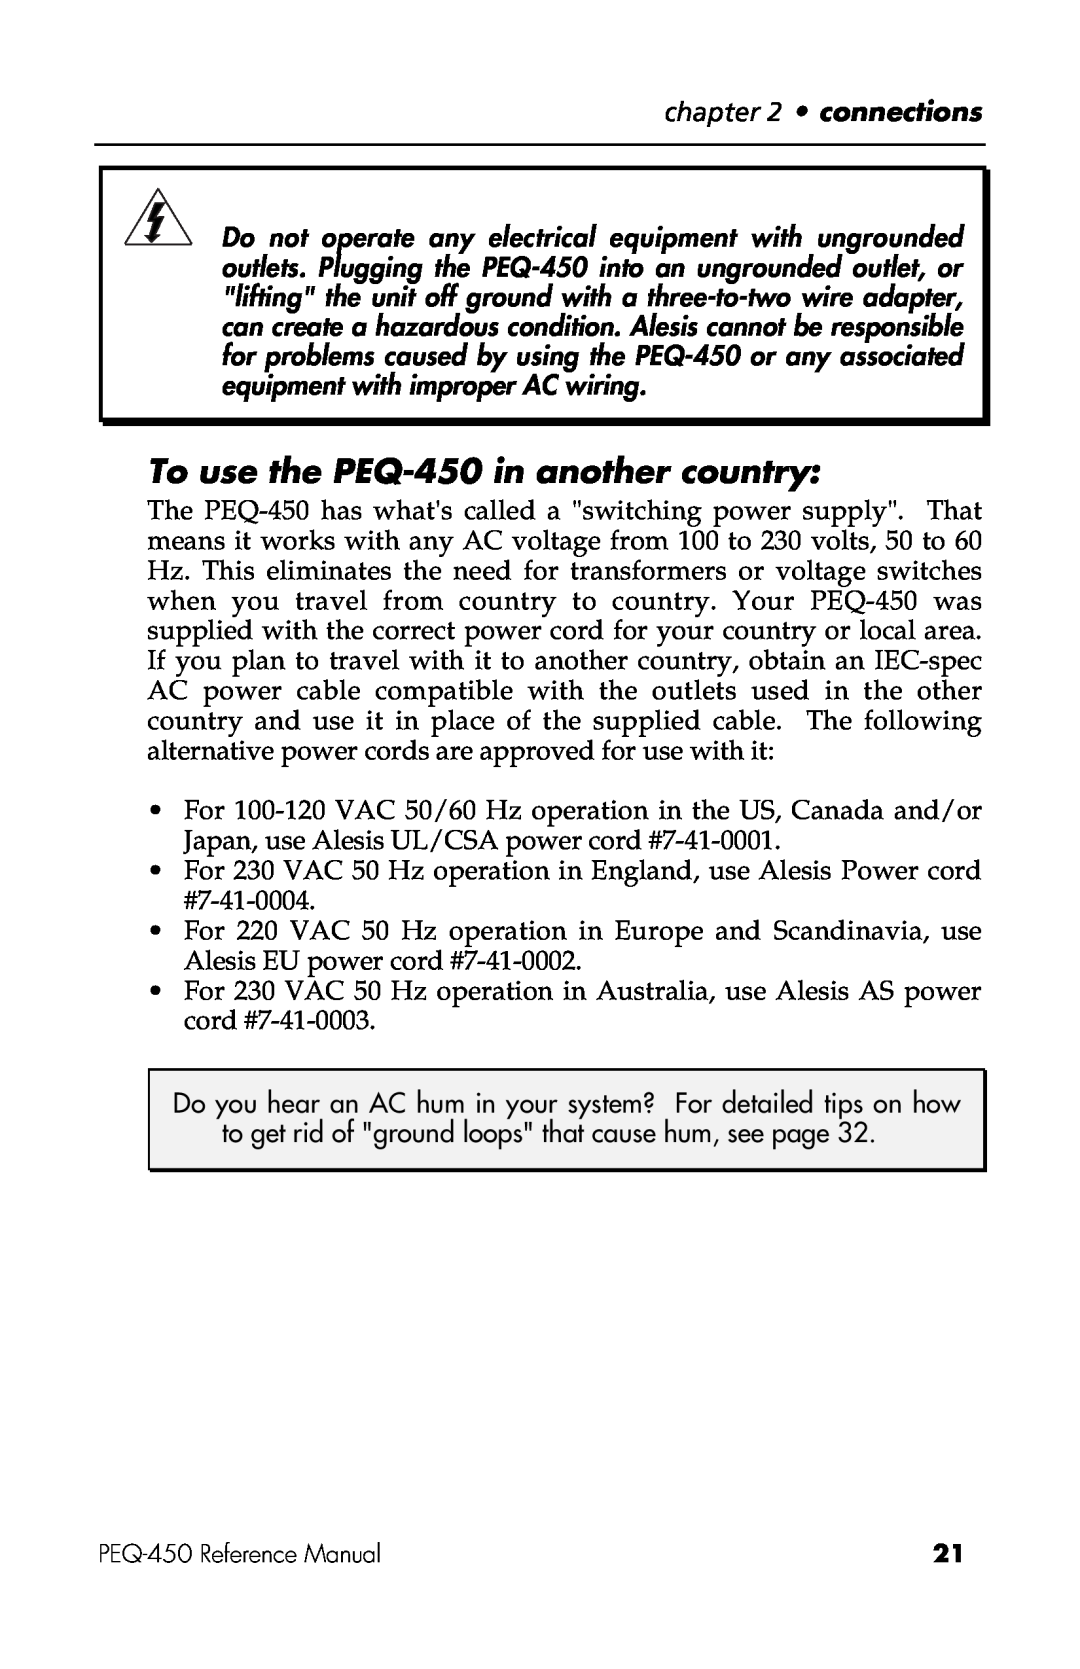 Alesis manual To use the PEQ-450in another country, connections 